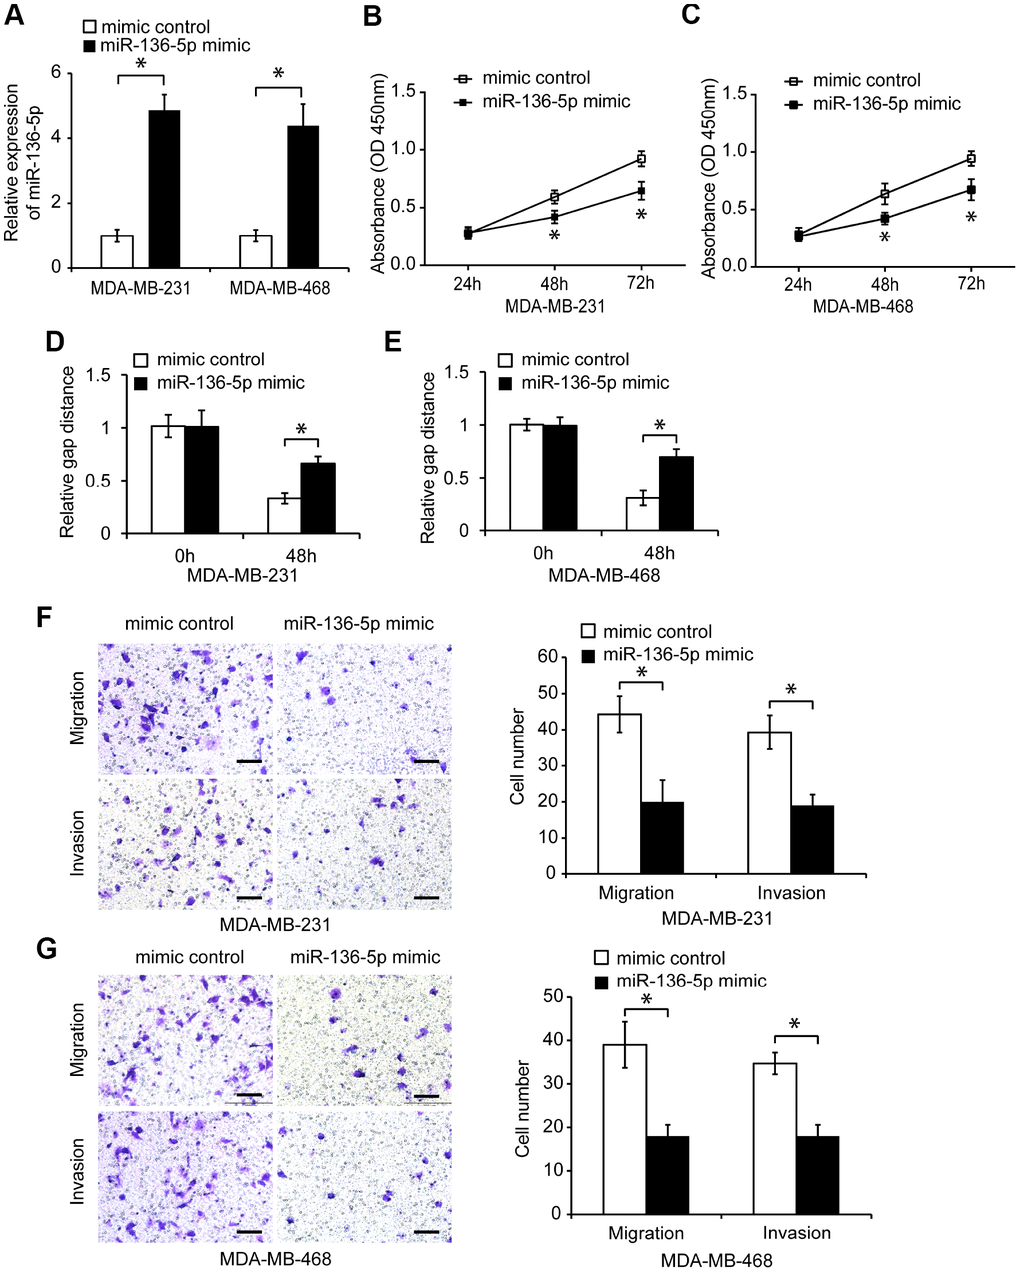 Overexpression of miR-136-5p reduces TNBC cell proliferation, migration, and invasion. (A) Relative miR-136-5p expression in TNBC cells transfected with mimic control or miR-136-5p mimic. (B, C) Proliferation of TNBC cells transfected with mimic control or miR-136-5p mimic, analyzed by CCK8 assay. (D, E) Wound healing assay of the migration capacity of TNBC cells transfected with mimic control or miR-136-5p mimic. (F, G) Migration and invasion of TNBC cells transfected with mimic control or miR-136-5p mimic, analyzed by transwell assays. Scale bars, 100 μm. * p 